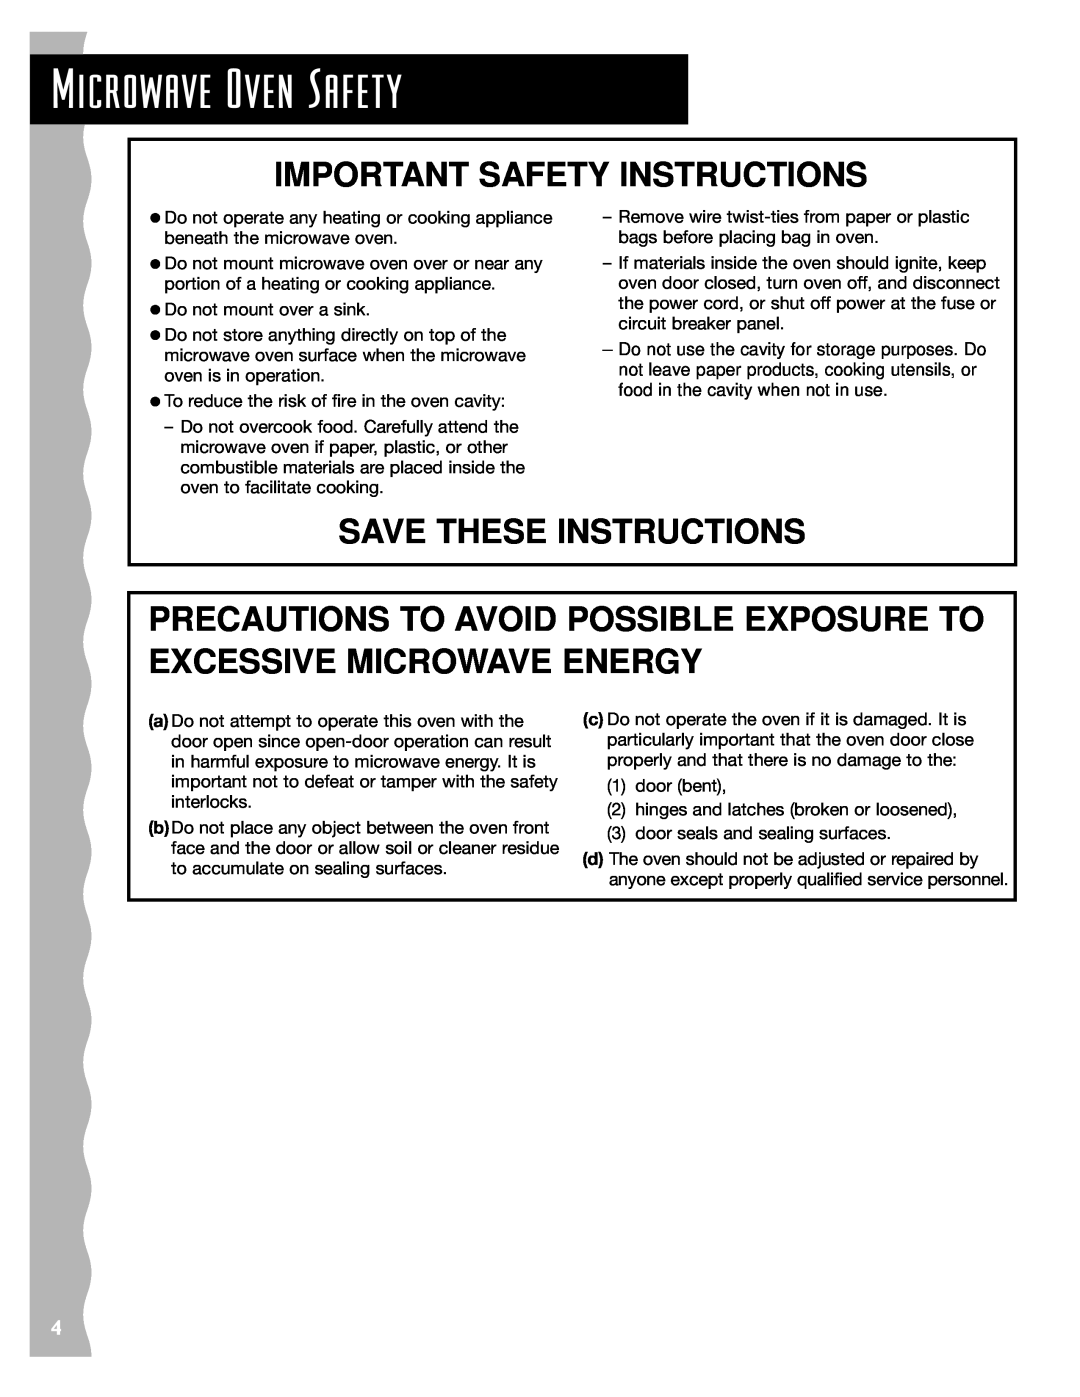 KitchenAid KCMC155J Precautions To Avoid Possible Exposure To Excessive Microwave Energy, Microwave Oven Safety 